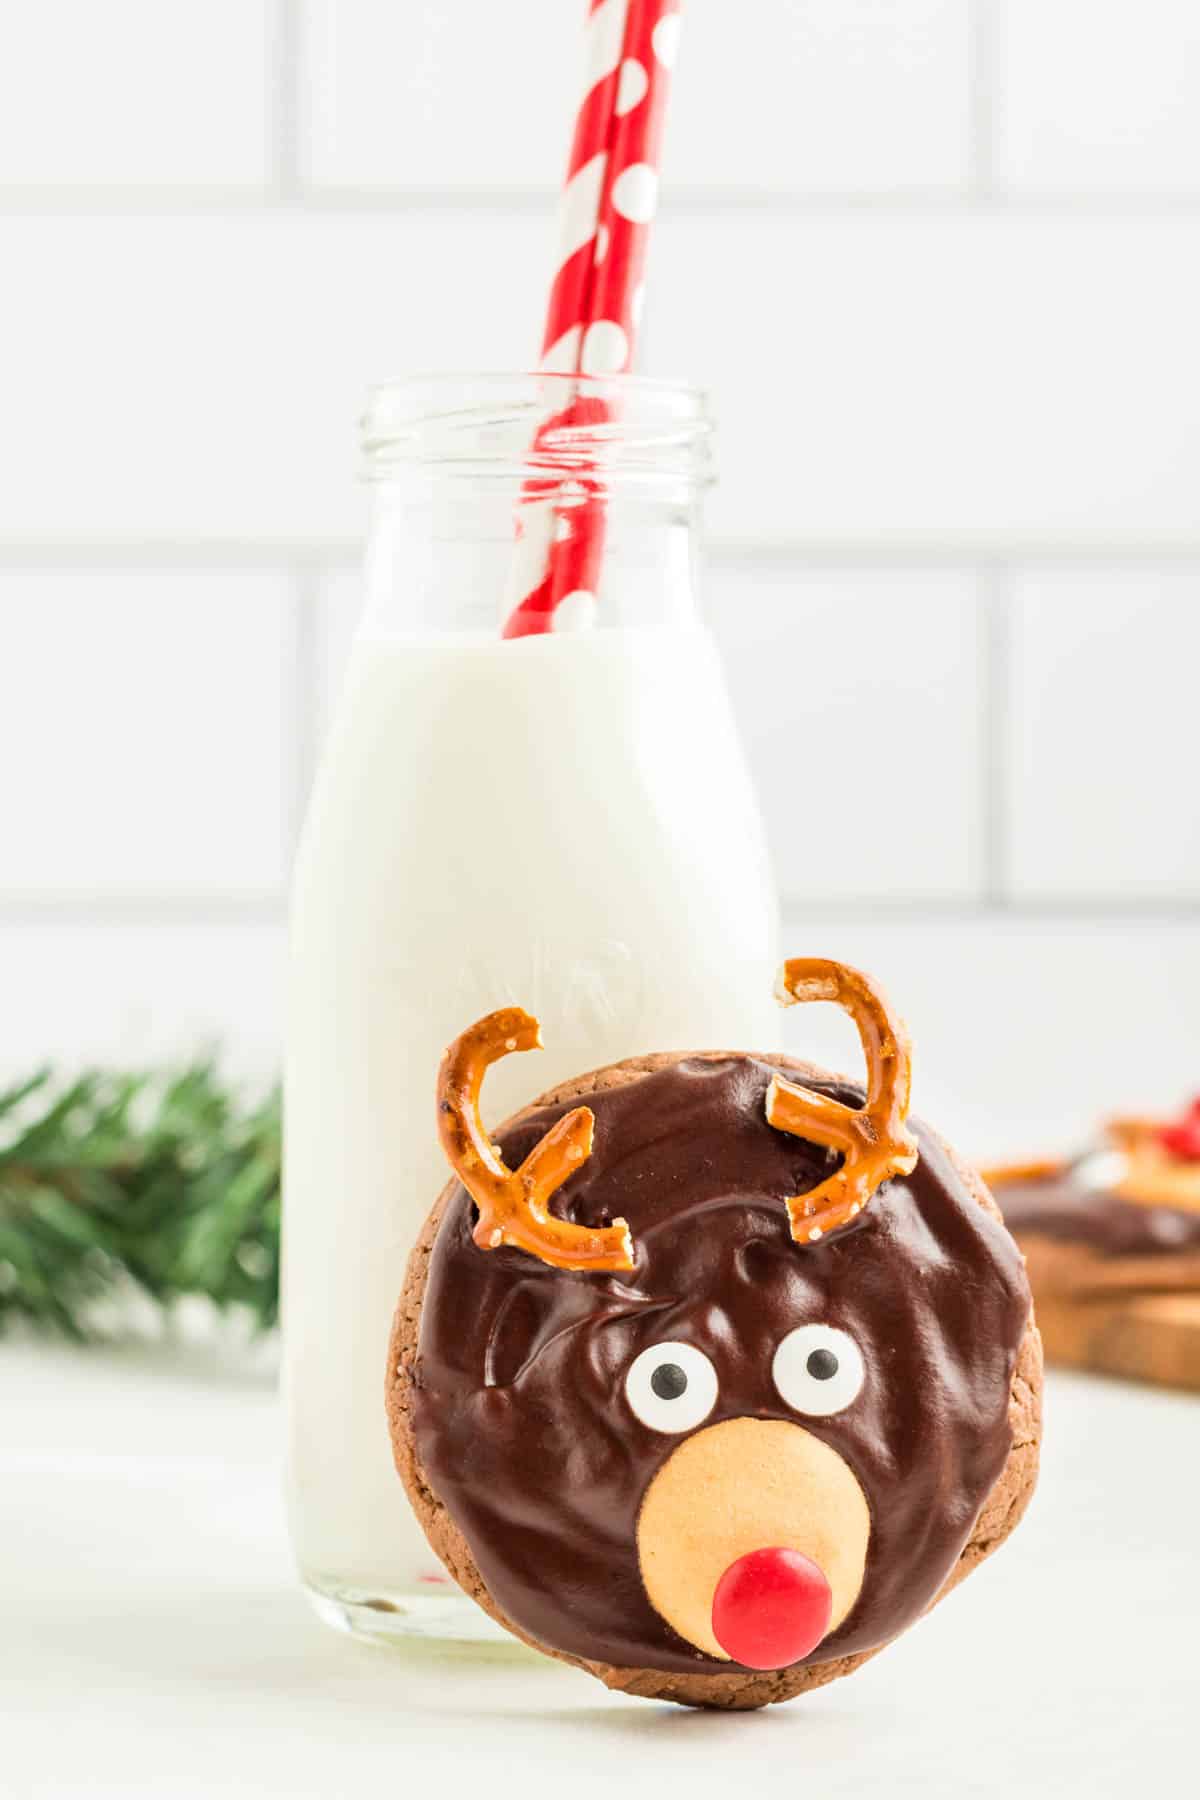 One of the Reindeer Cookies propped up against a glass of milk.